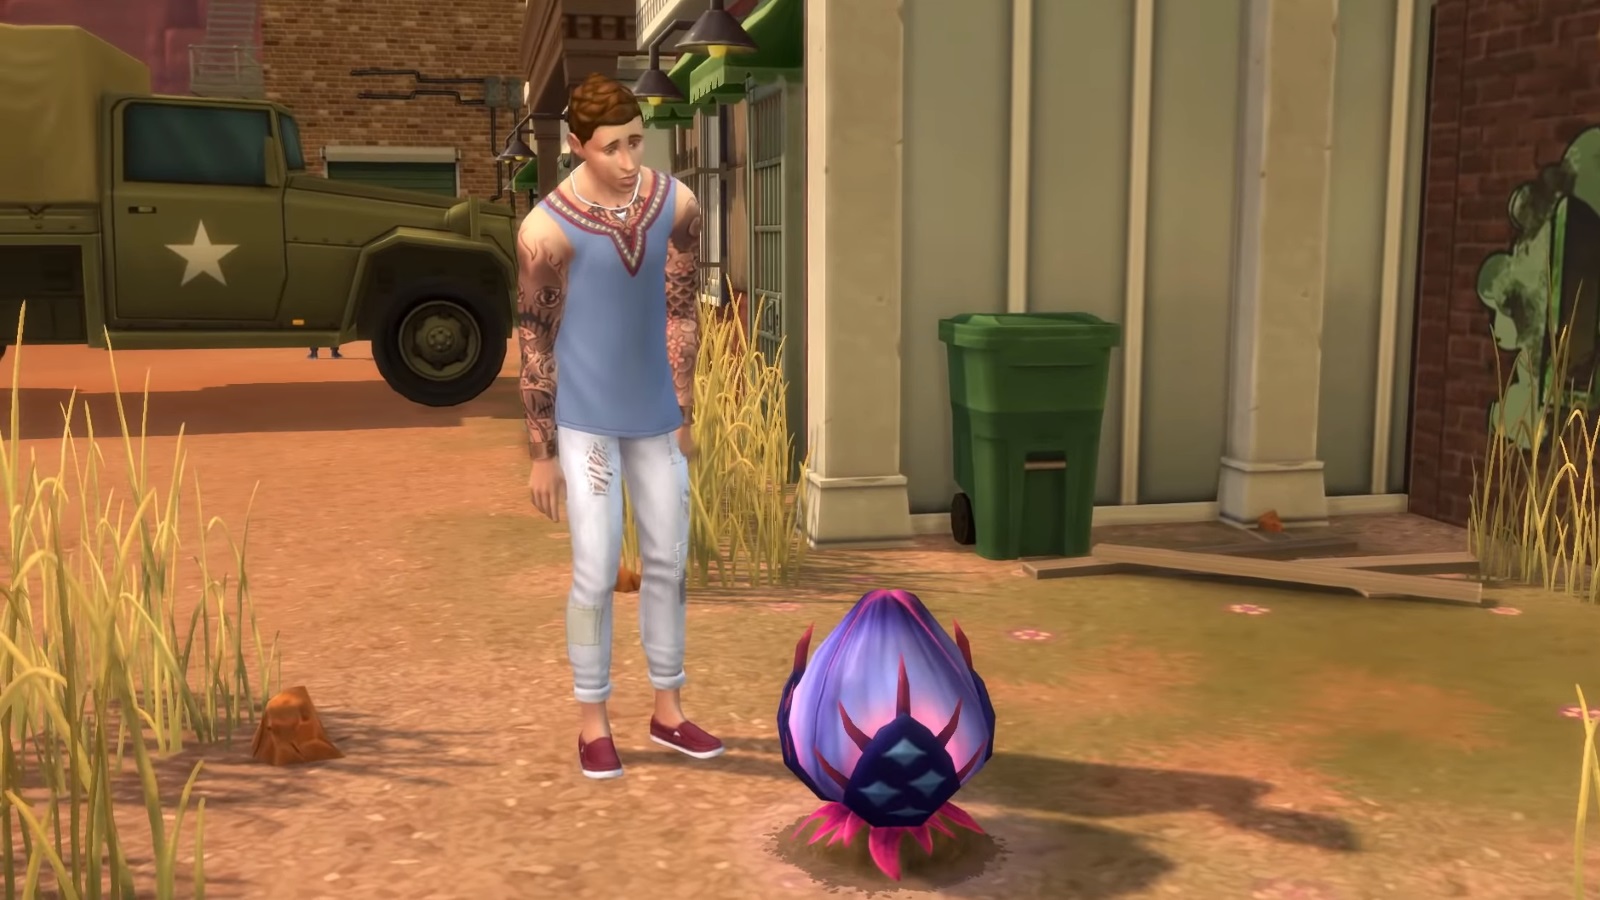 The Sims 4 gets weird in the StrangerVille Game Pack